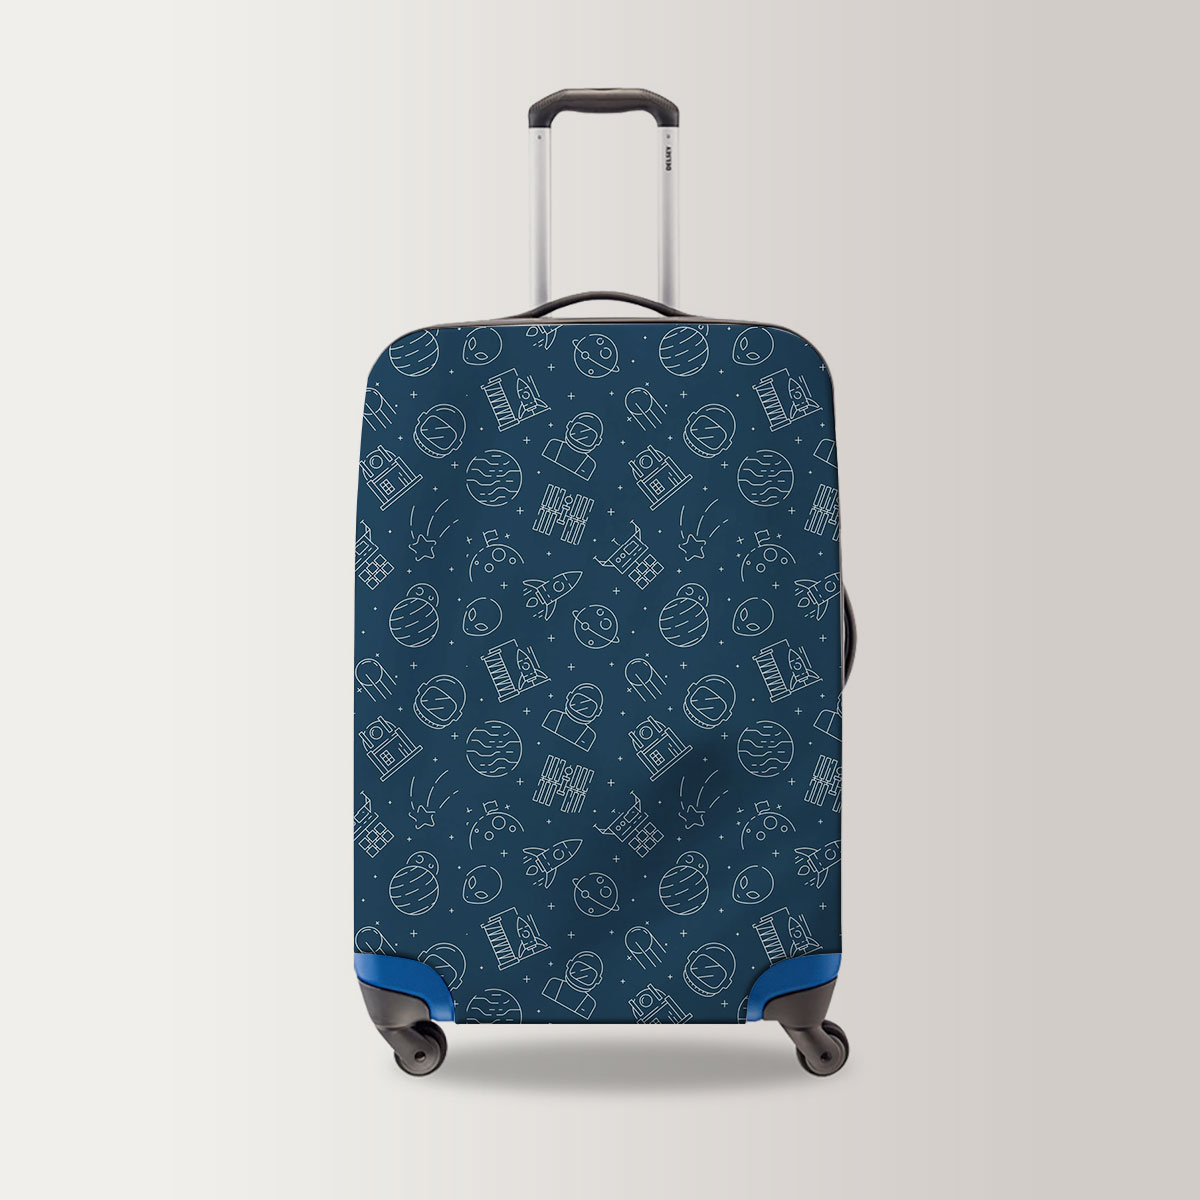 Futuristic Universe Background With Astronaut Luggage Bag